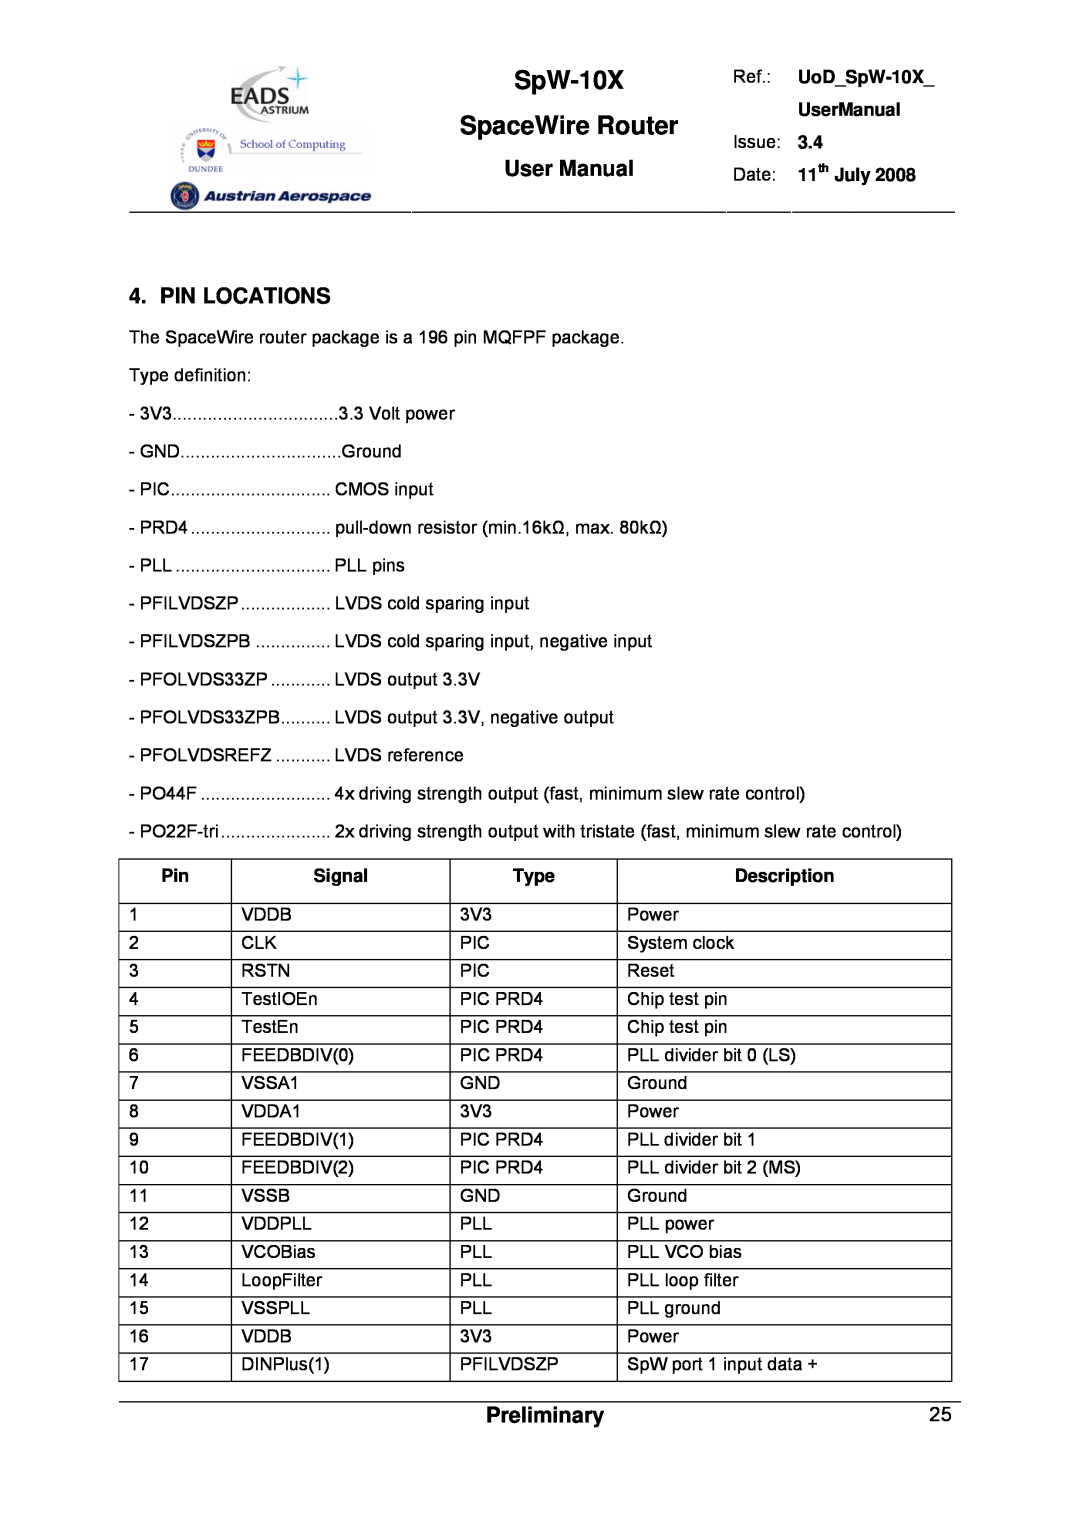 Atmel SpW-10X user manual Pin Locations, SpaceWire Router, User Manual, Preliminary 